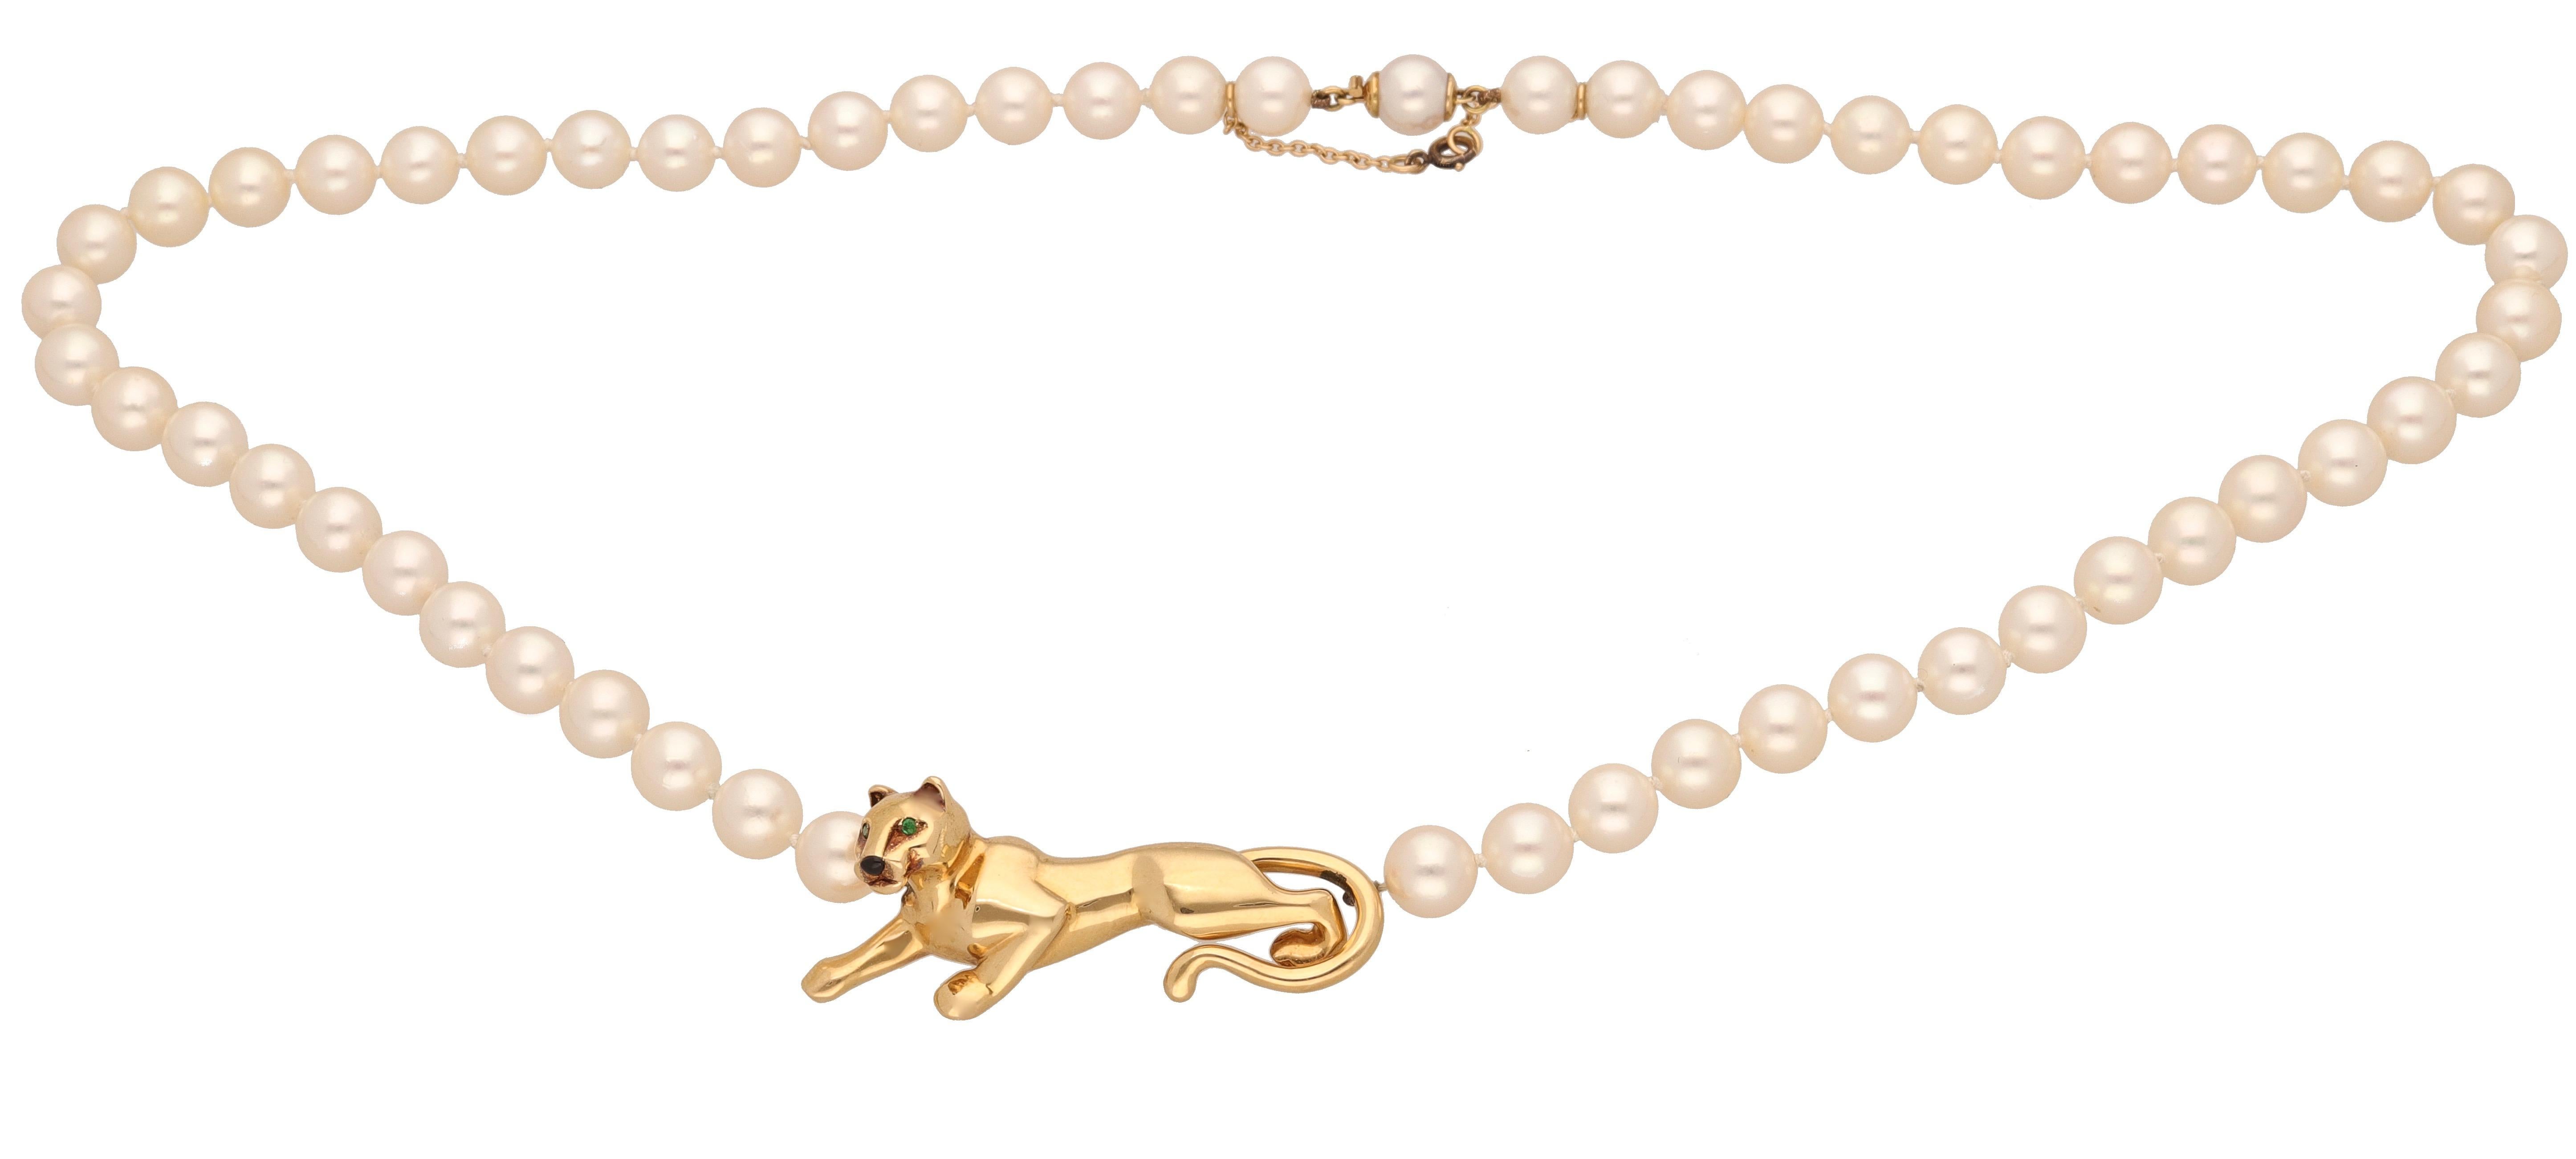 18 kt yellow gold Panther pearls necklace by Cartier.
This iconic necklace is realized in yellow gold and with white pearls ( diameter 7 mm.)  
In the central part of the necklace you can see the iconic symbol of the maison, the Panther.
Is made in